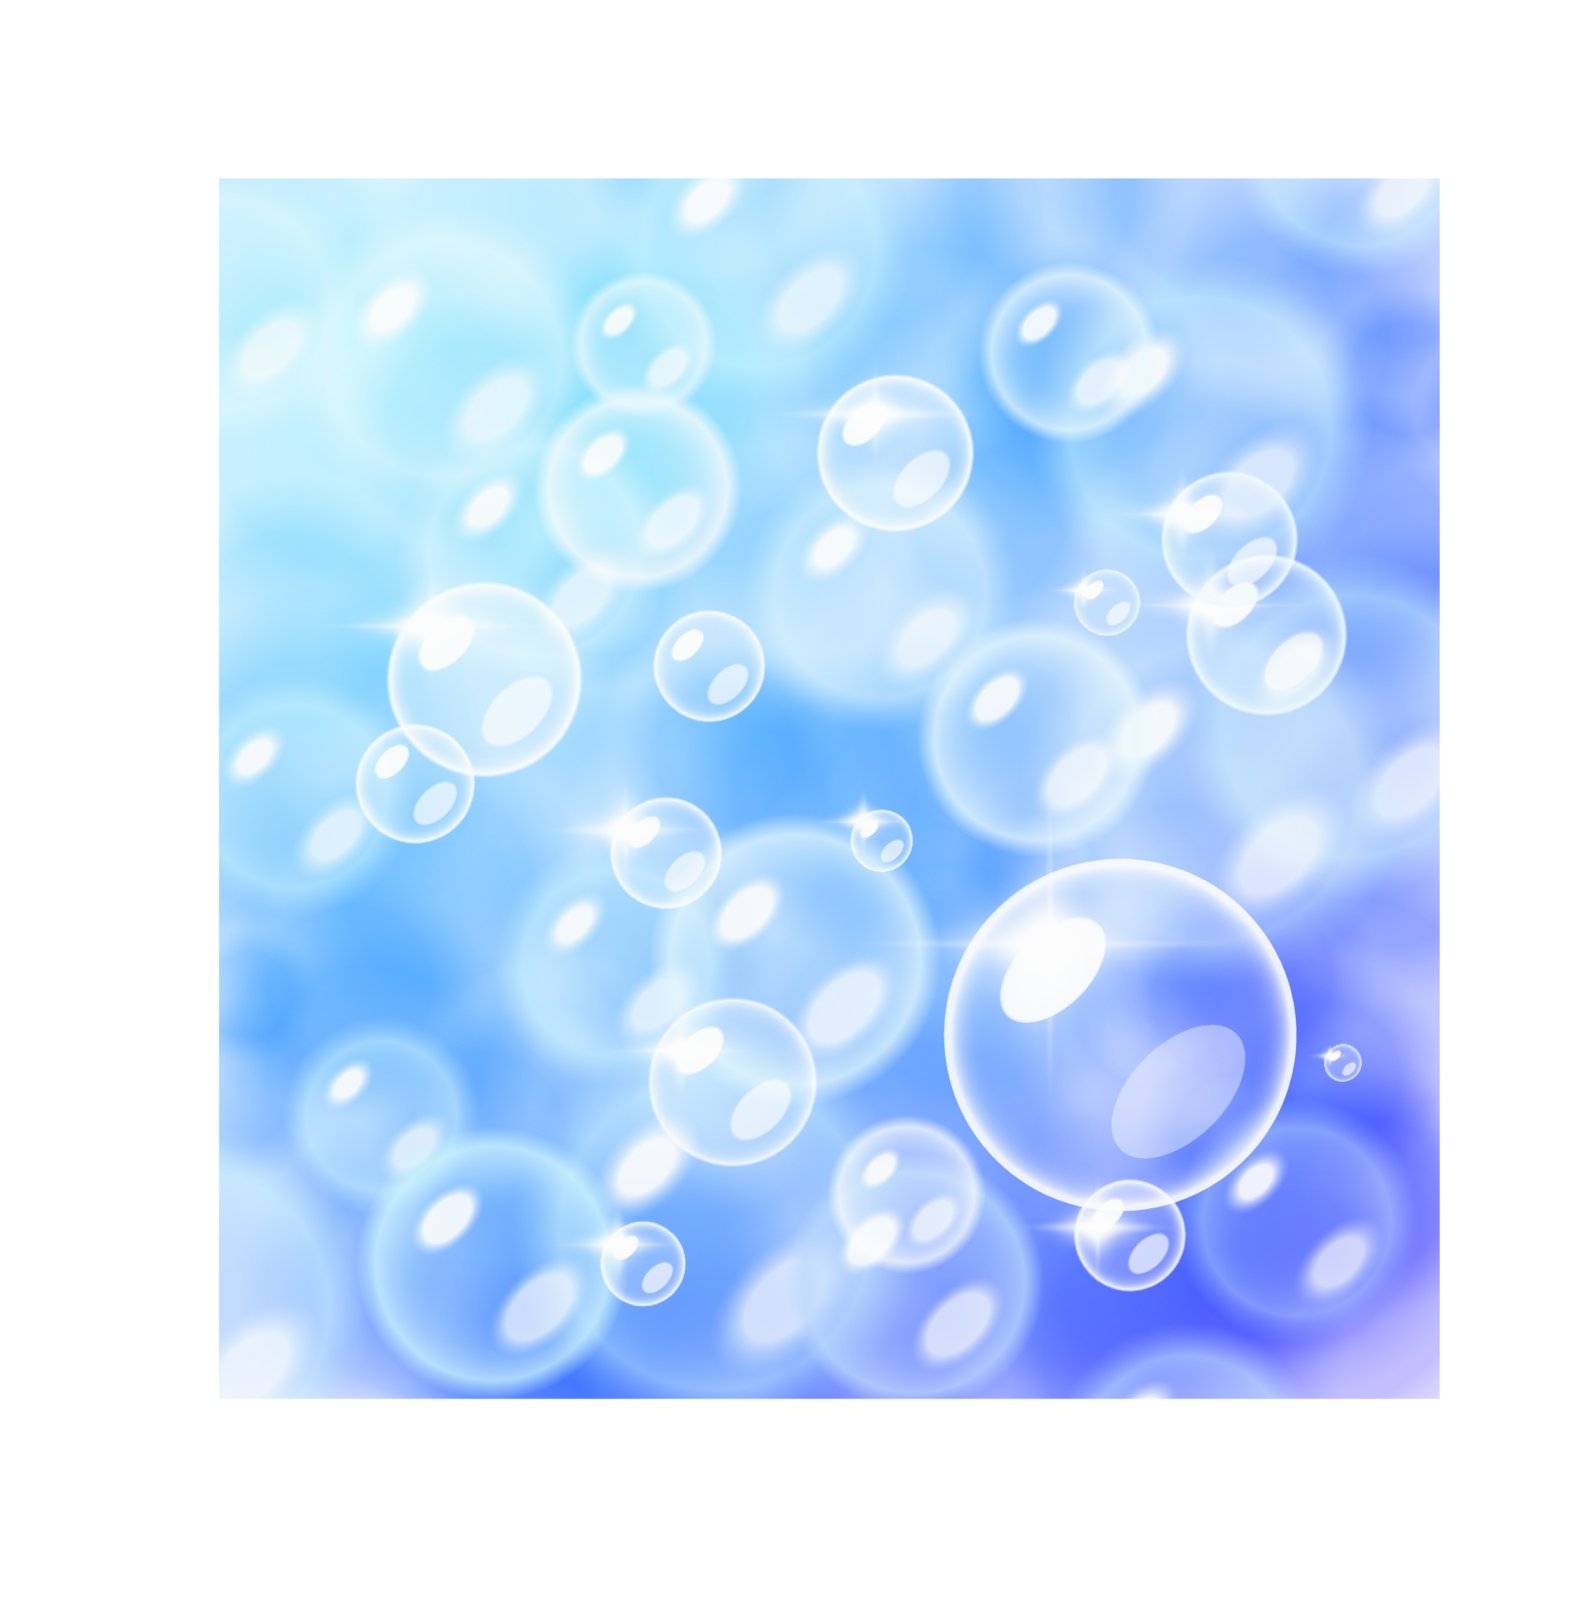 Blurred bubbles over a blue background